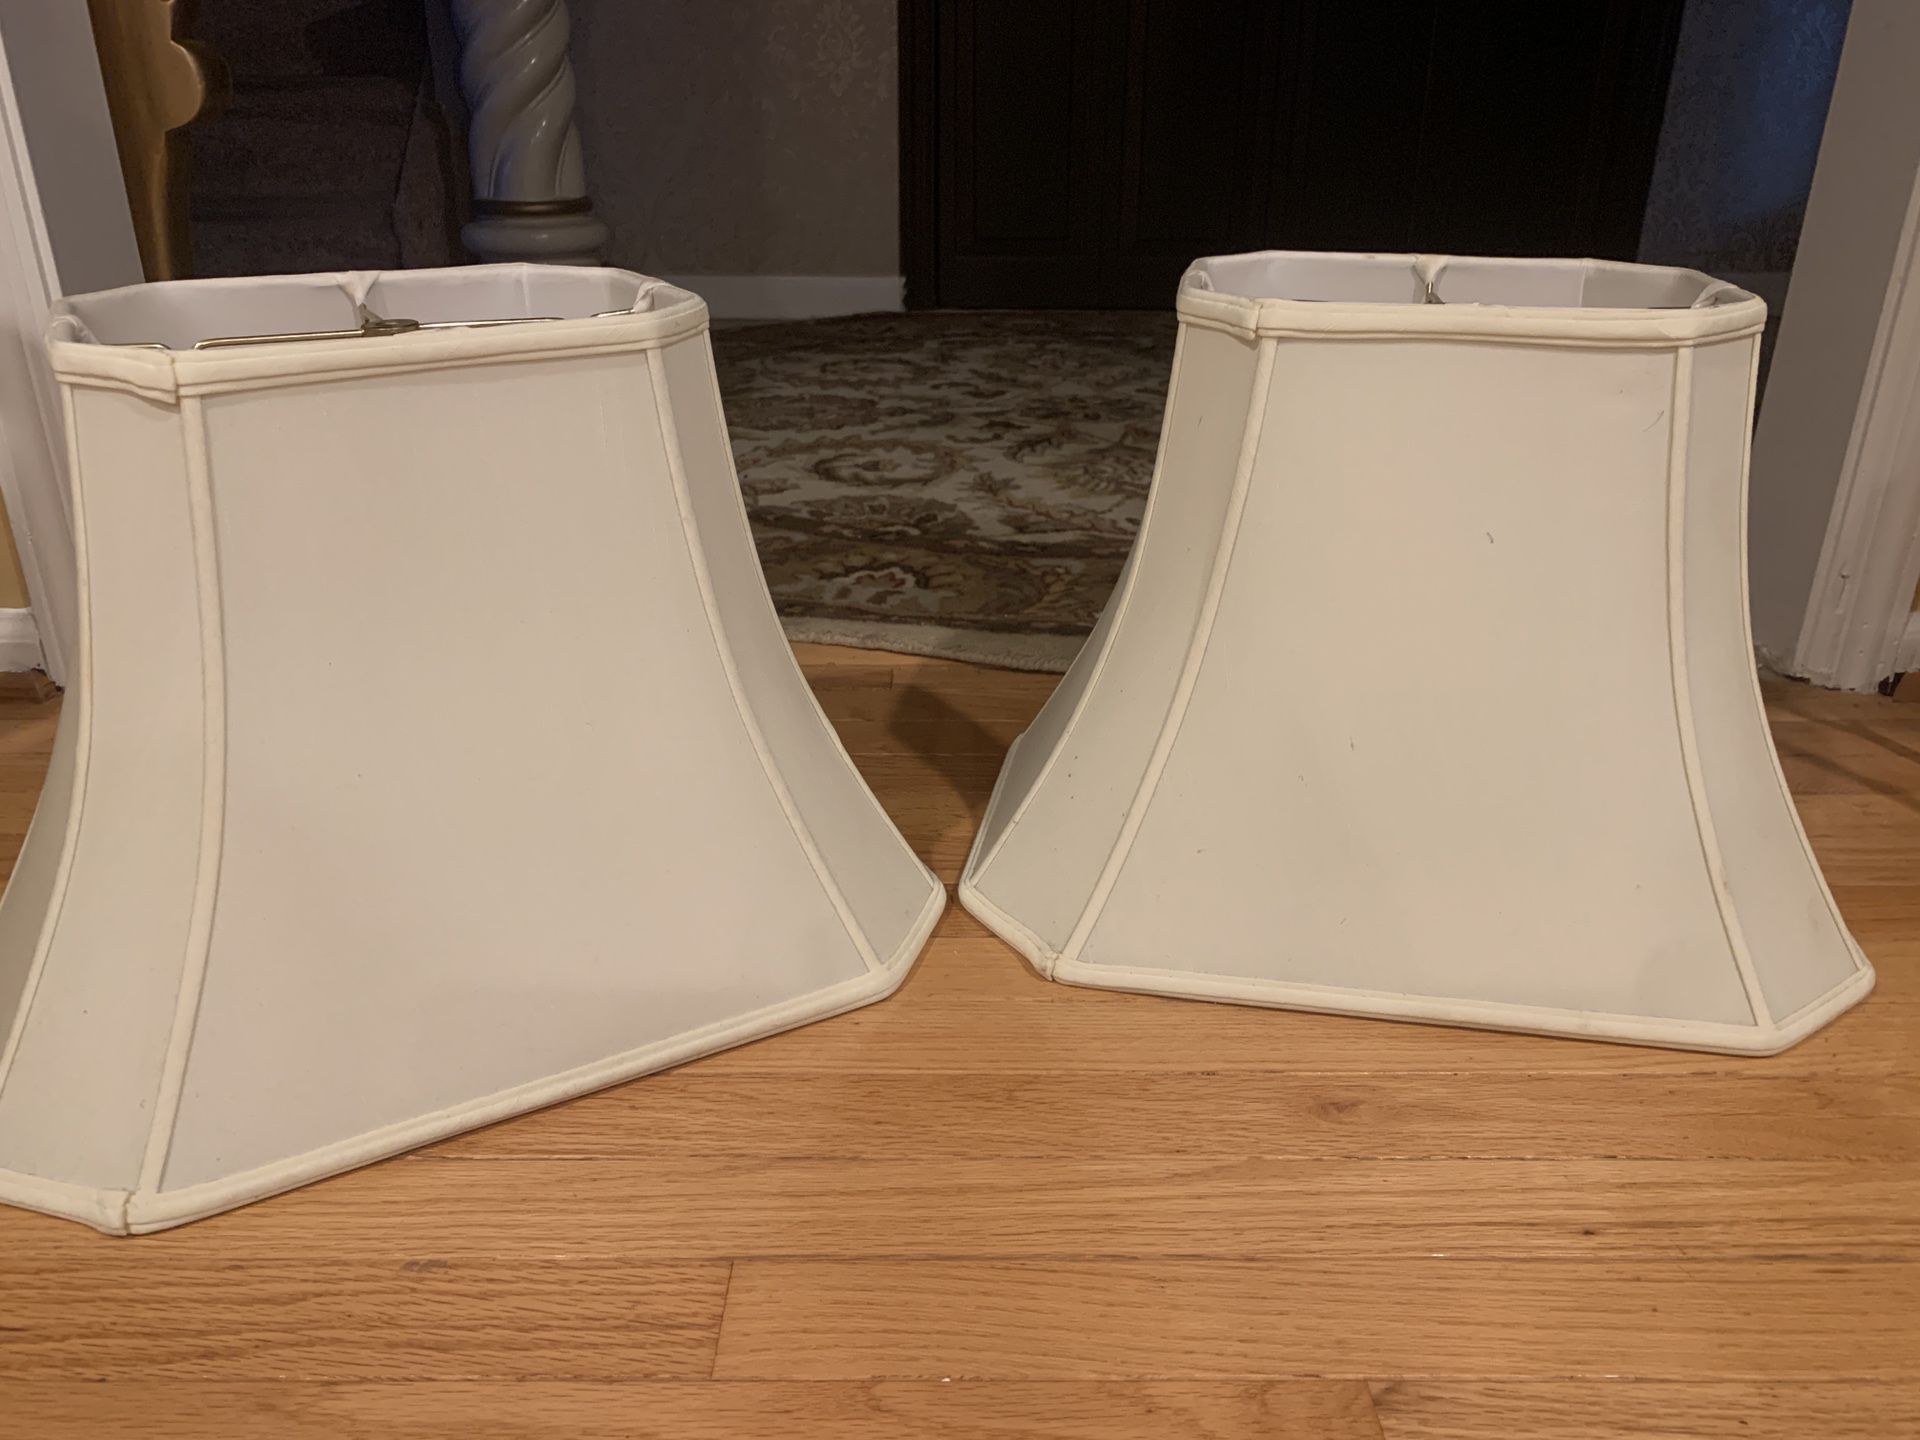 Set of very sturdy, off-white lamp shades